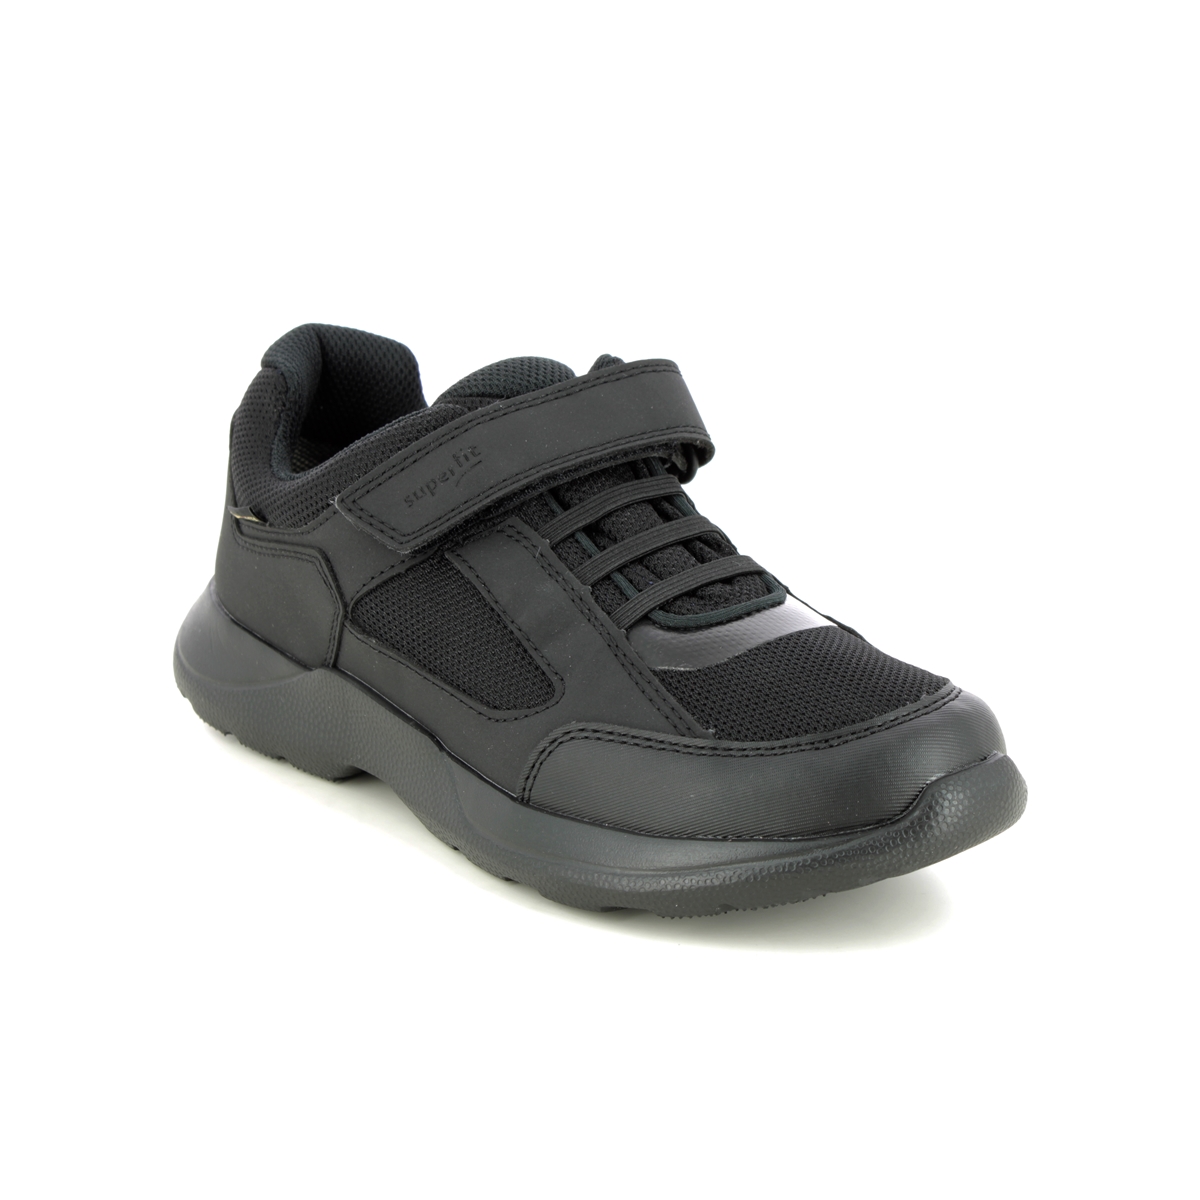 Superfit Rush Gtx Bungee Black Kids trainers 1006223-0000 in a Plain Man-made in Size 29